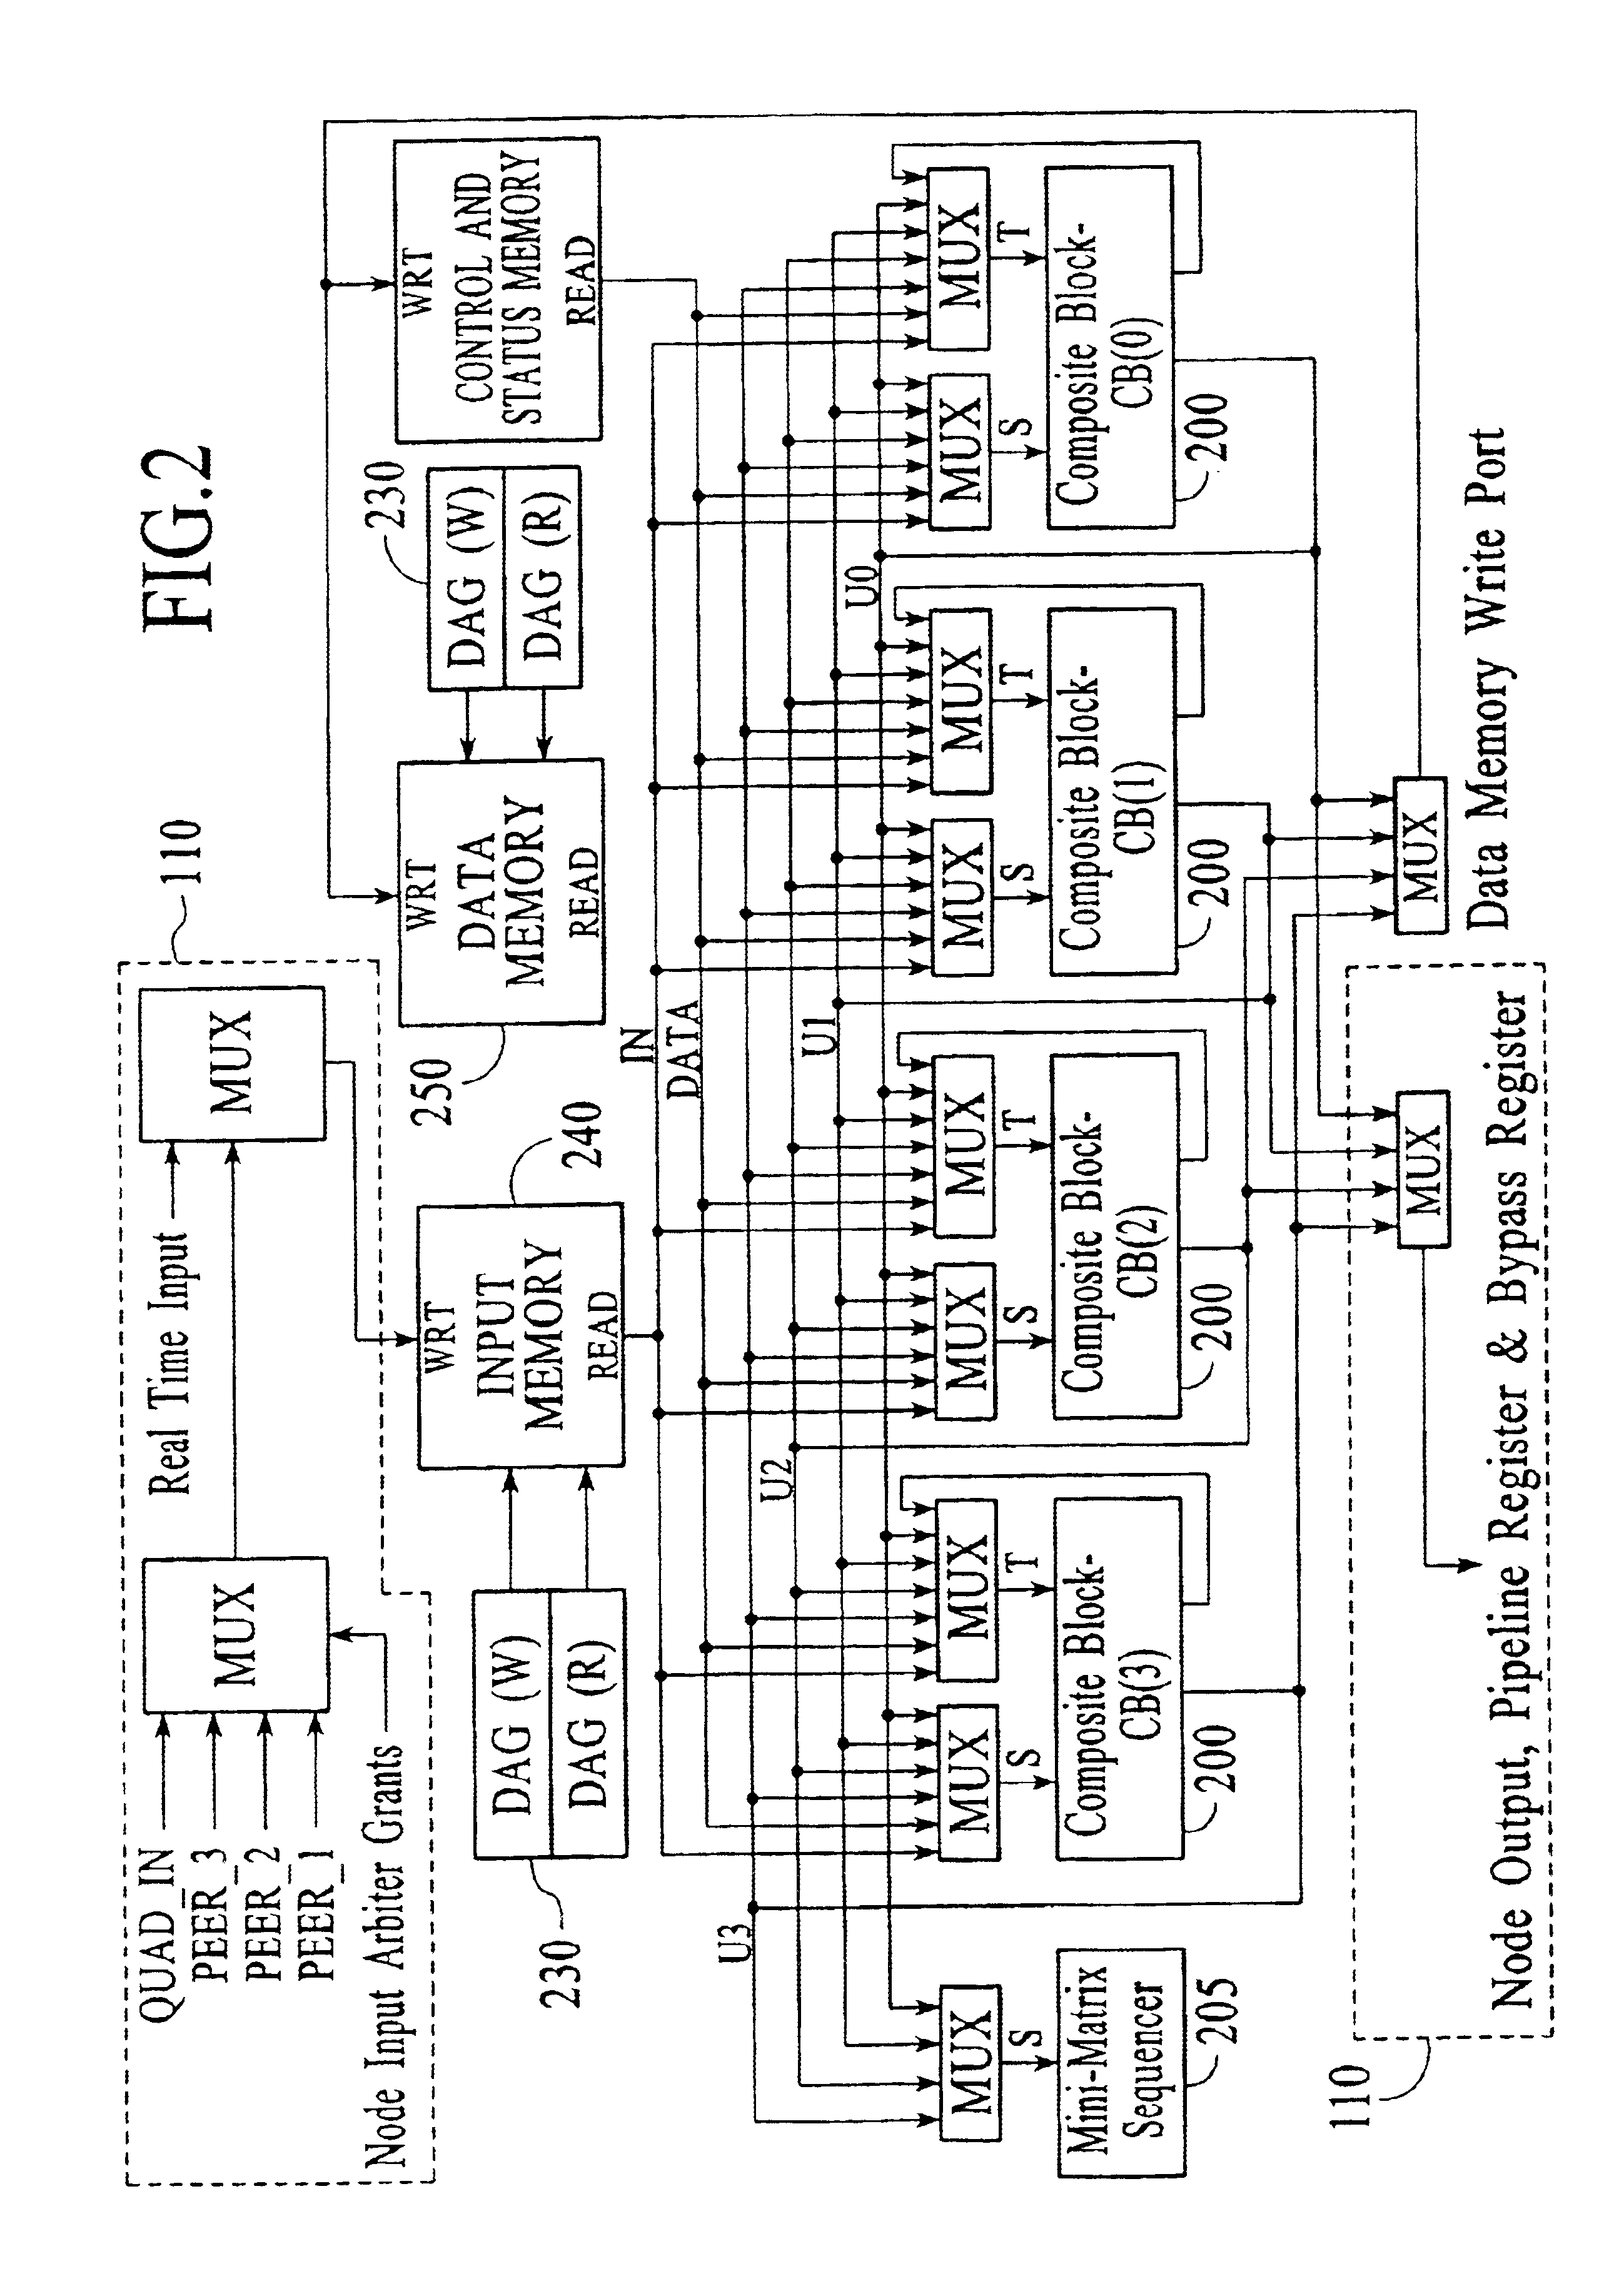 Adaptive computing engine with dataflow graph based sequencing in reconfigurable mini-matrices of composite functional blocks